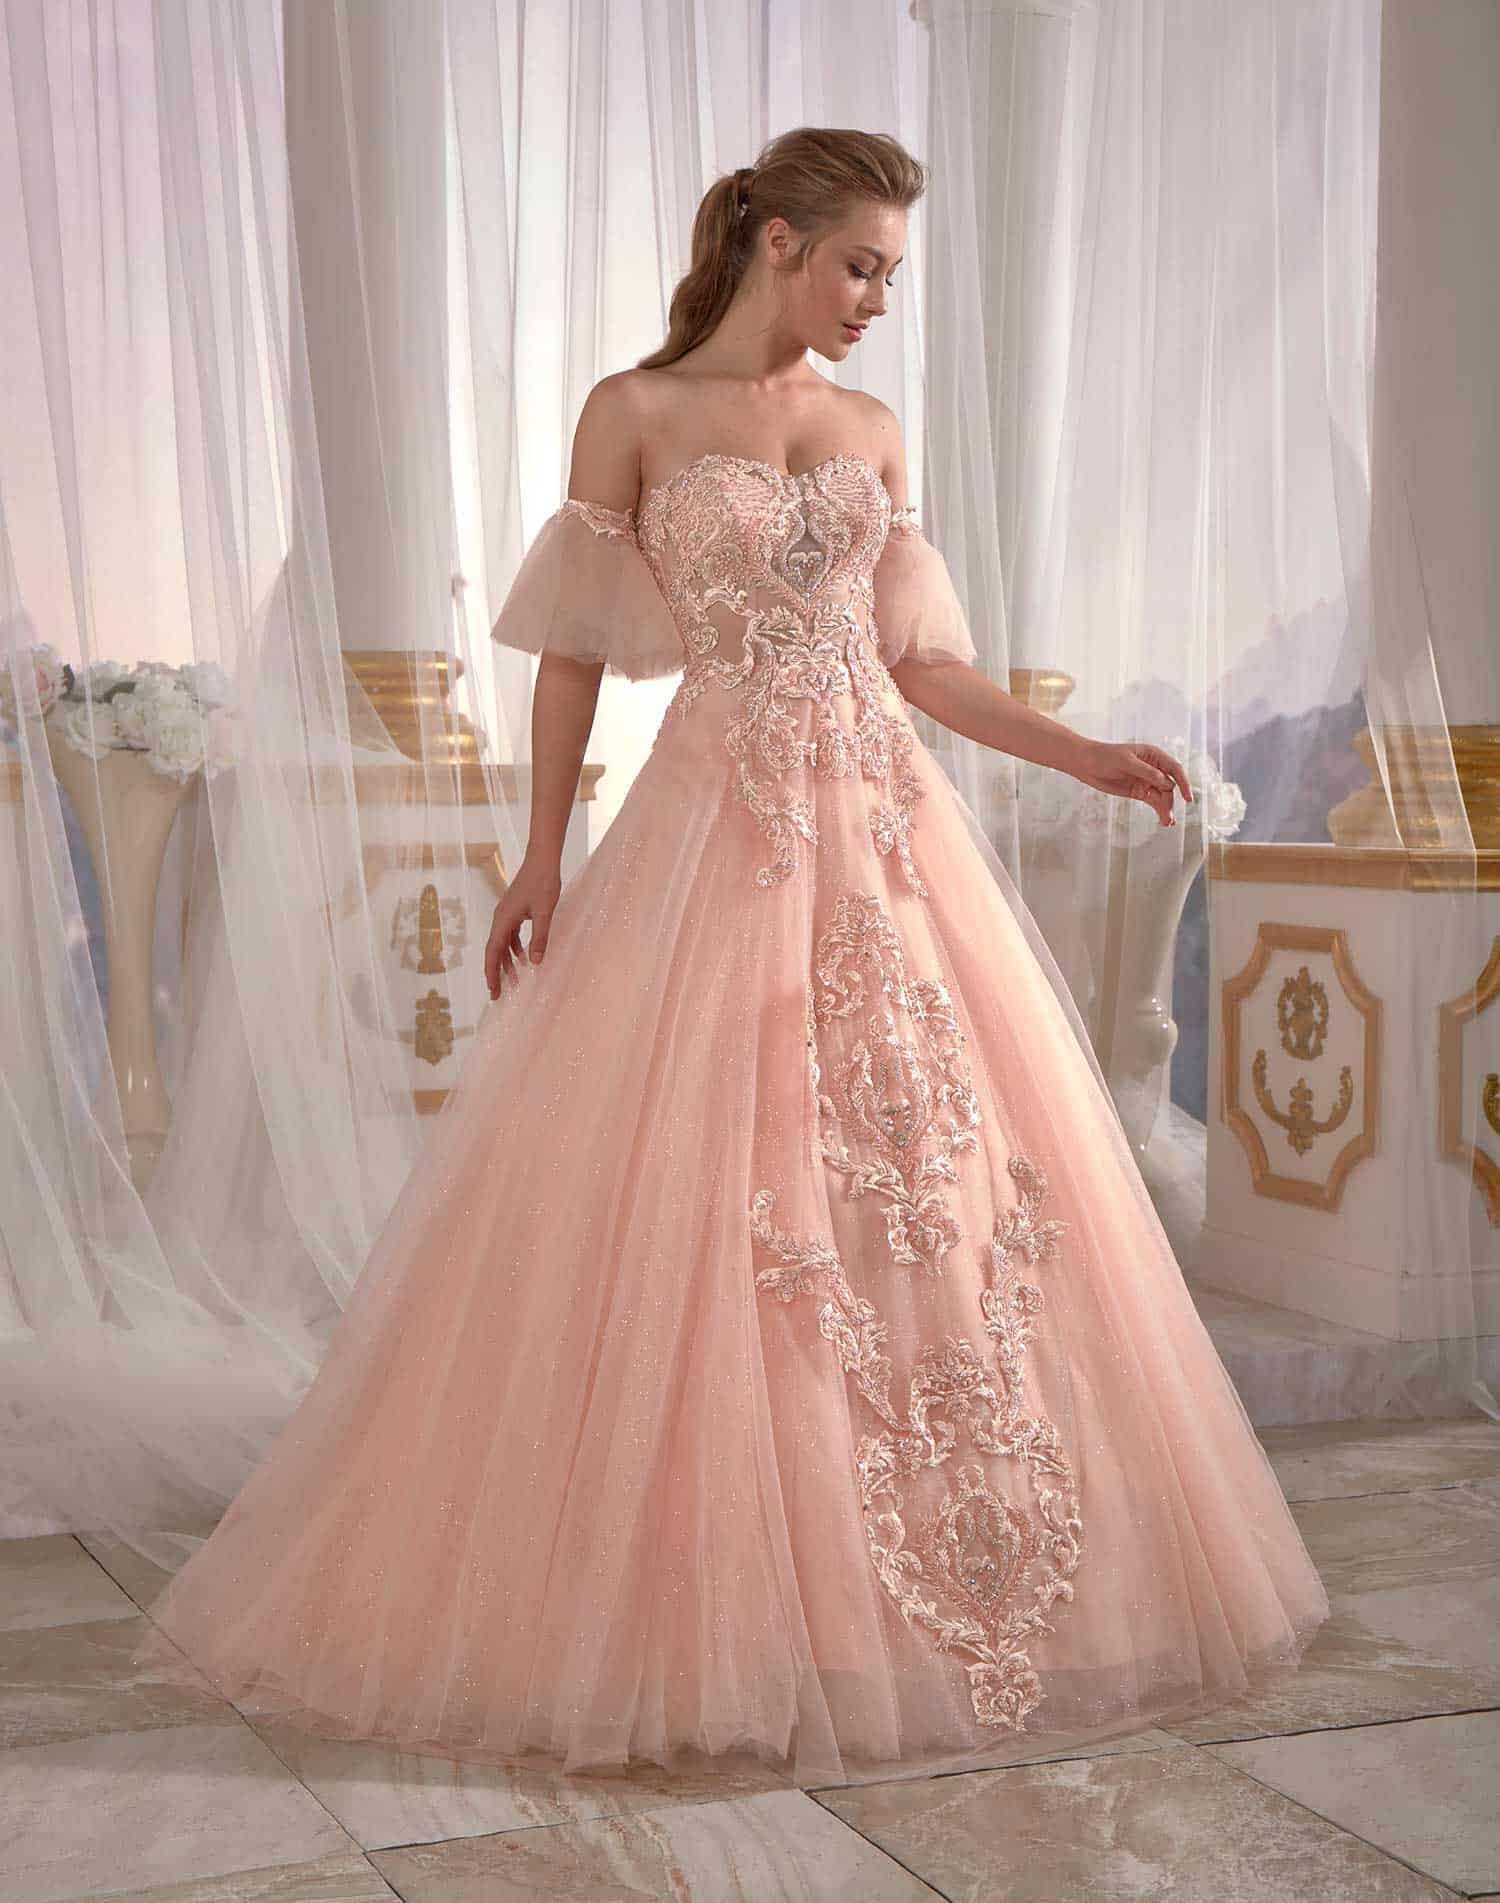 prom dresses online Pale Yellowish Pink Evening Dress Tulle on Pearl Applique Needle & Thread embroidered Cold Shoulder (2)